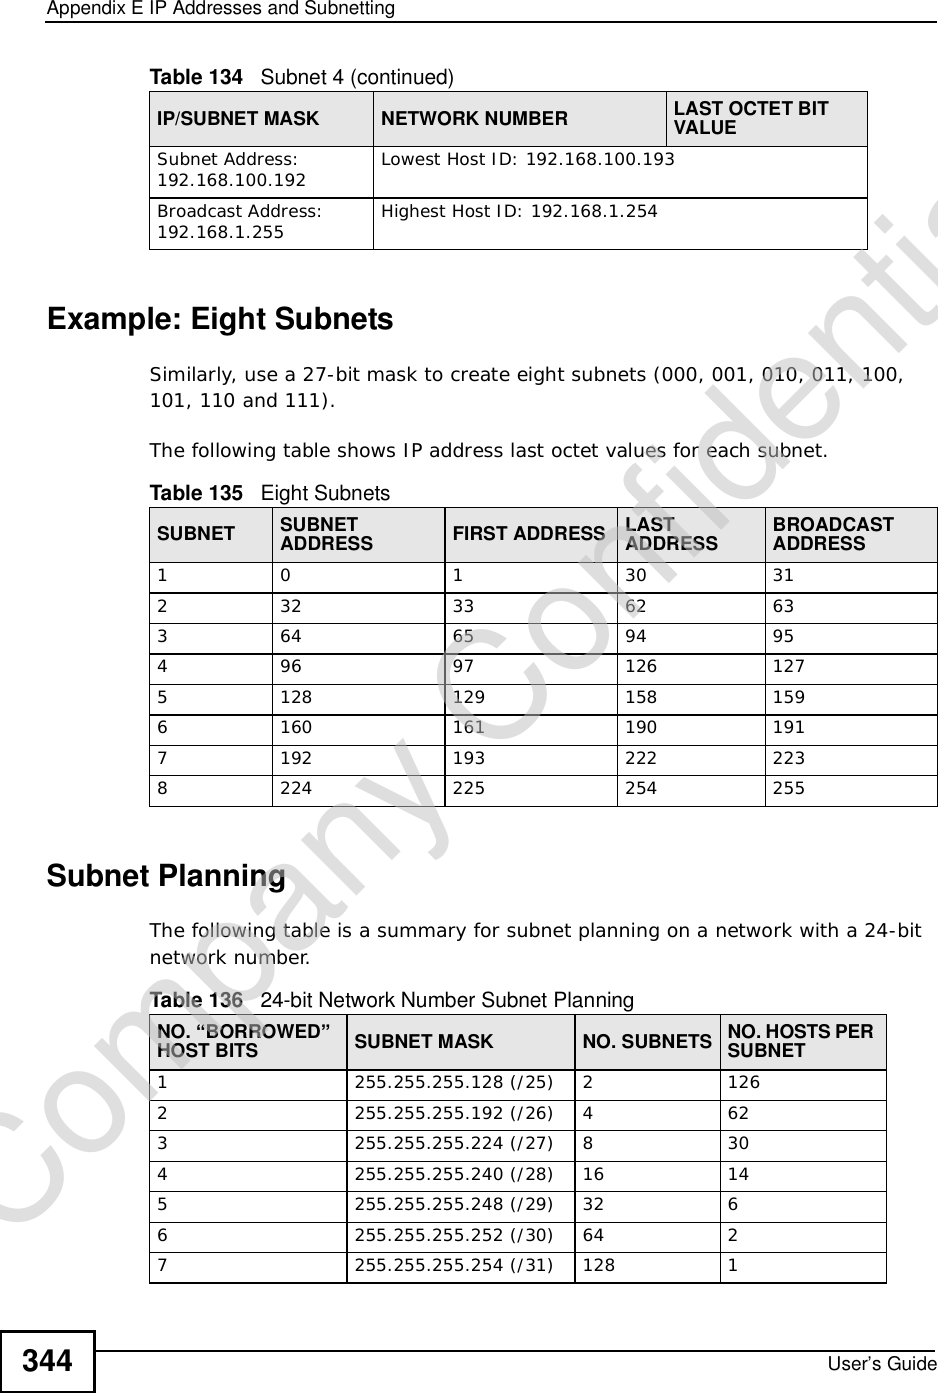 Appendix EIP Addresses and SubnettingUser’s Guide344Example: Eight SubnetsSimilarly, use a 27-bit mask to create eight subnets (000, 001, 010, 011, 100, 101, 110 and 111). The following table shows IP address last octet values for each subnet.Subnet PlanningThe following table is a summary for subnet planning on a network with a 24-bit network number.Subnet Address: 192.168.100.192 Lowest Host ID: 192.168.100.193Broadcast Address: 192.168.1.255 Highest Host ID: 192.168.1.254Table 134   Subnet 4 (continued)IP/SUBNET MASK NETWORK NUMBER LAST OCTET BIT VALUETable 135   Eight SubnetsSUBNET SUBNET ADDRESS FIRST ADDRESS LAST ADDRESS BROADCAST ADDRESS10130 312 32 33 62 633 64 65 94 954 96 97 126 1275 128 129 158 1596 160 161 190 1917 192 193 222 2238 224 225 254 255Table 136   24-bit Network Number Subnet PlanningNO. “BORROWED” HOST BITS SUBNET MASK NO. SUBNETS NO. HOSTS PER SUBNET1255.255.255.128 (/25) 2 1262 255.255.255.192 (/26) 4 623 255.255.255.224 (/27) 8 304 255.255.255.240 (/28) 16 145 255.255.255.248 (/29) 32 66 255.255.255.252 (/30) 64 27 255.255.255.254 (/31) 128 1Company Confidential